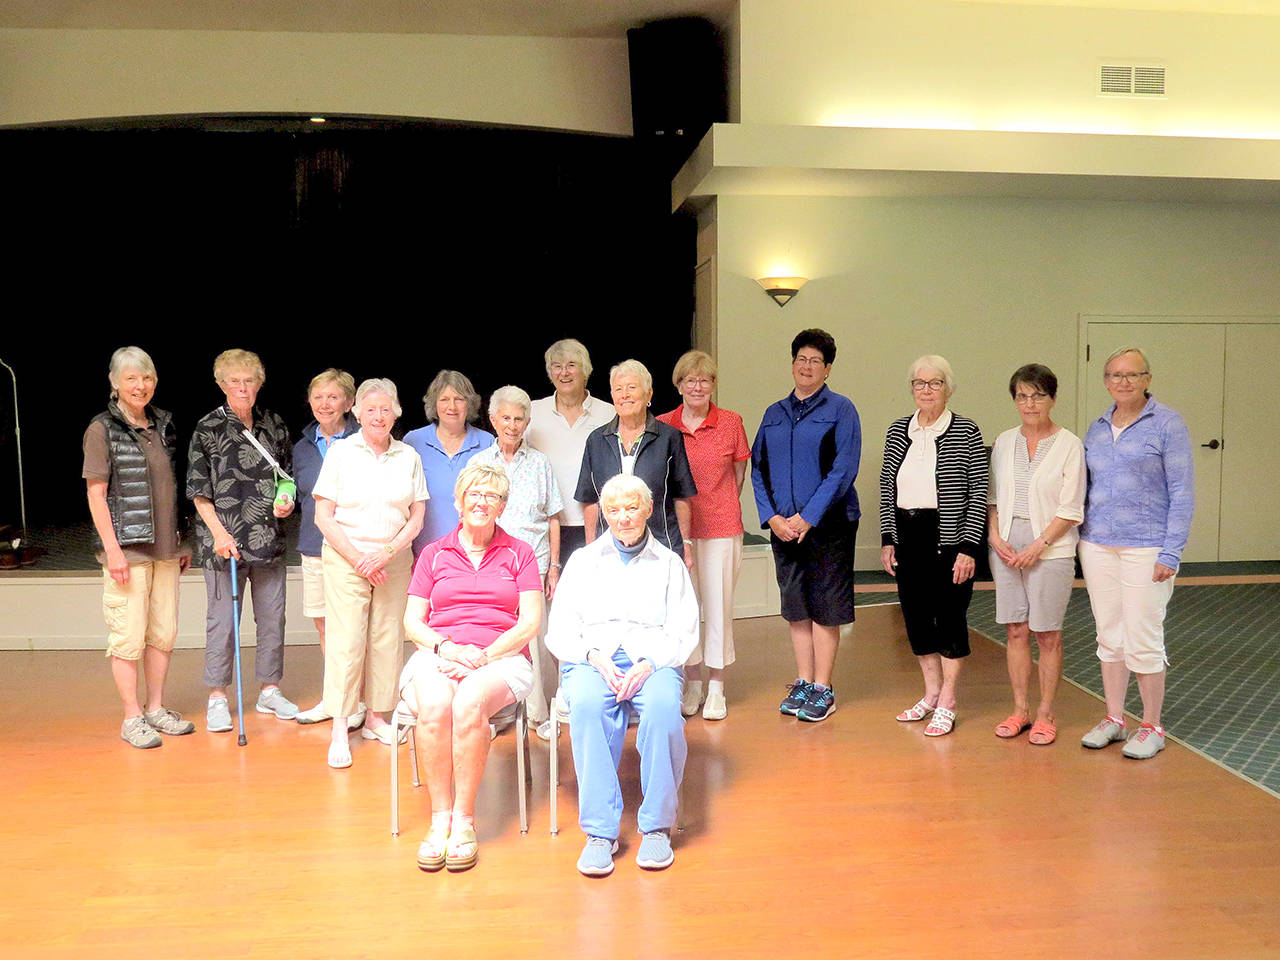 Sunland Women’s Golf Association recently celebrated its past captains with a golf tournament and luncheon. Past captains include Sherry Meythaler, Pat Beltz, Janet Real, Cecil Black, M.J. Anderson, Nonie Dunphy, Judy Kelley, Linda Beatty, Dana Burback, Judy Nordyke, Gwyen Boger, Kathy Tiedeman, Christy Wilson and (seated) Cheryl Coulter and Dorthy Plenert.